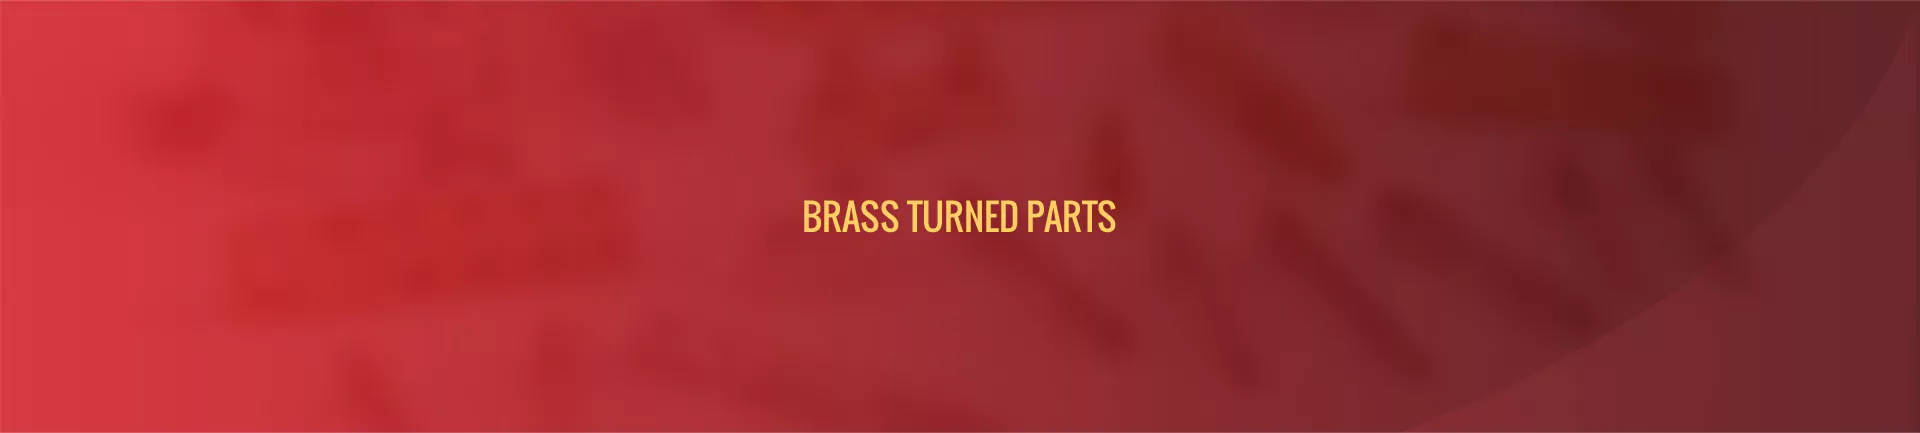 brass-turned-parts-banner